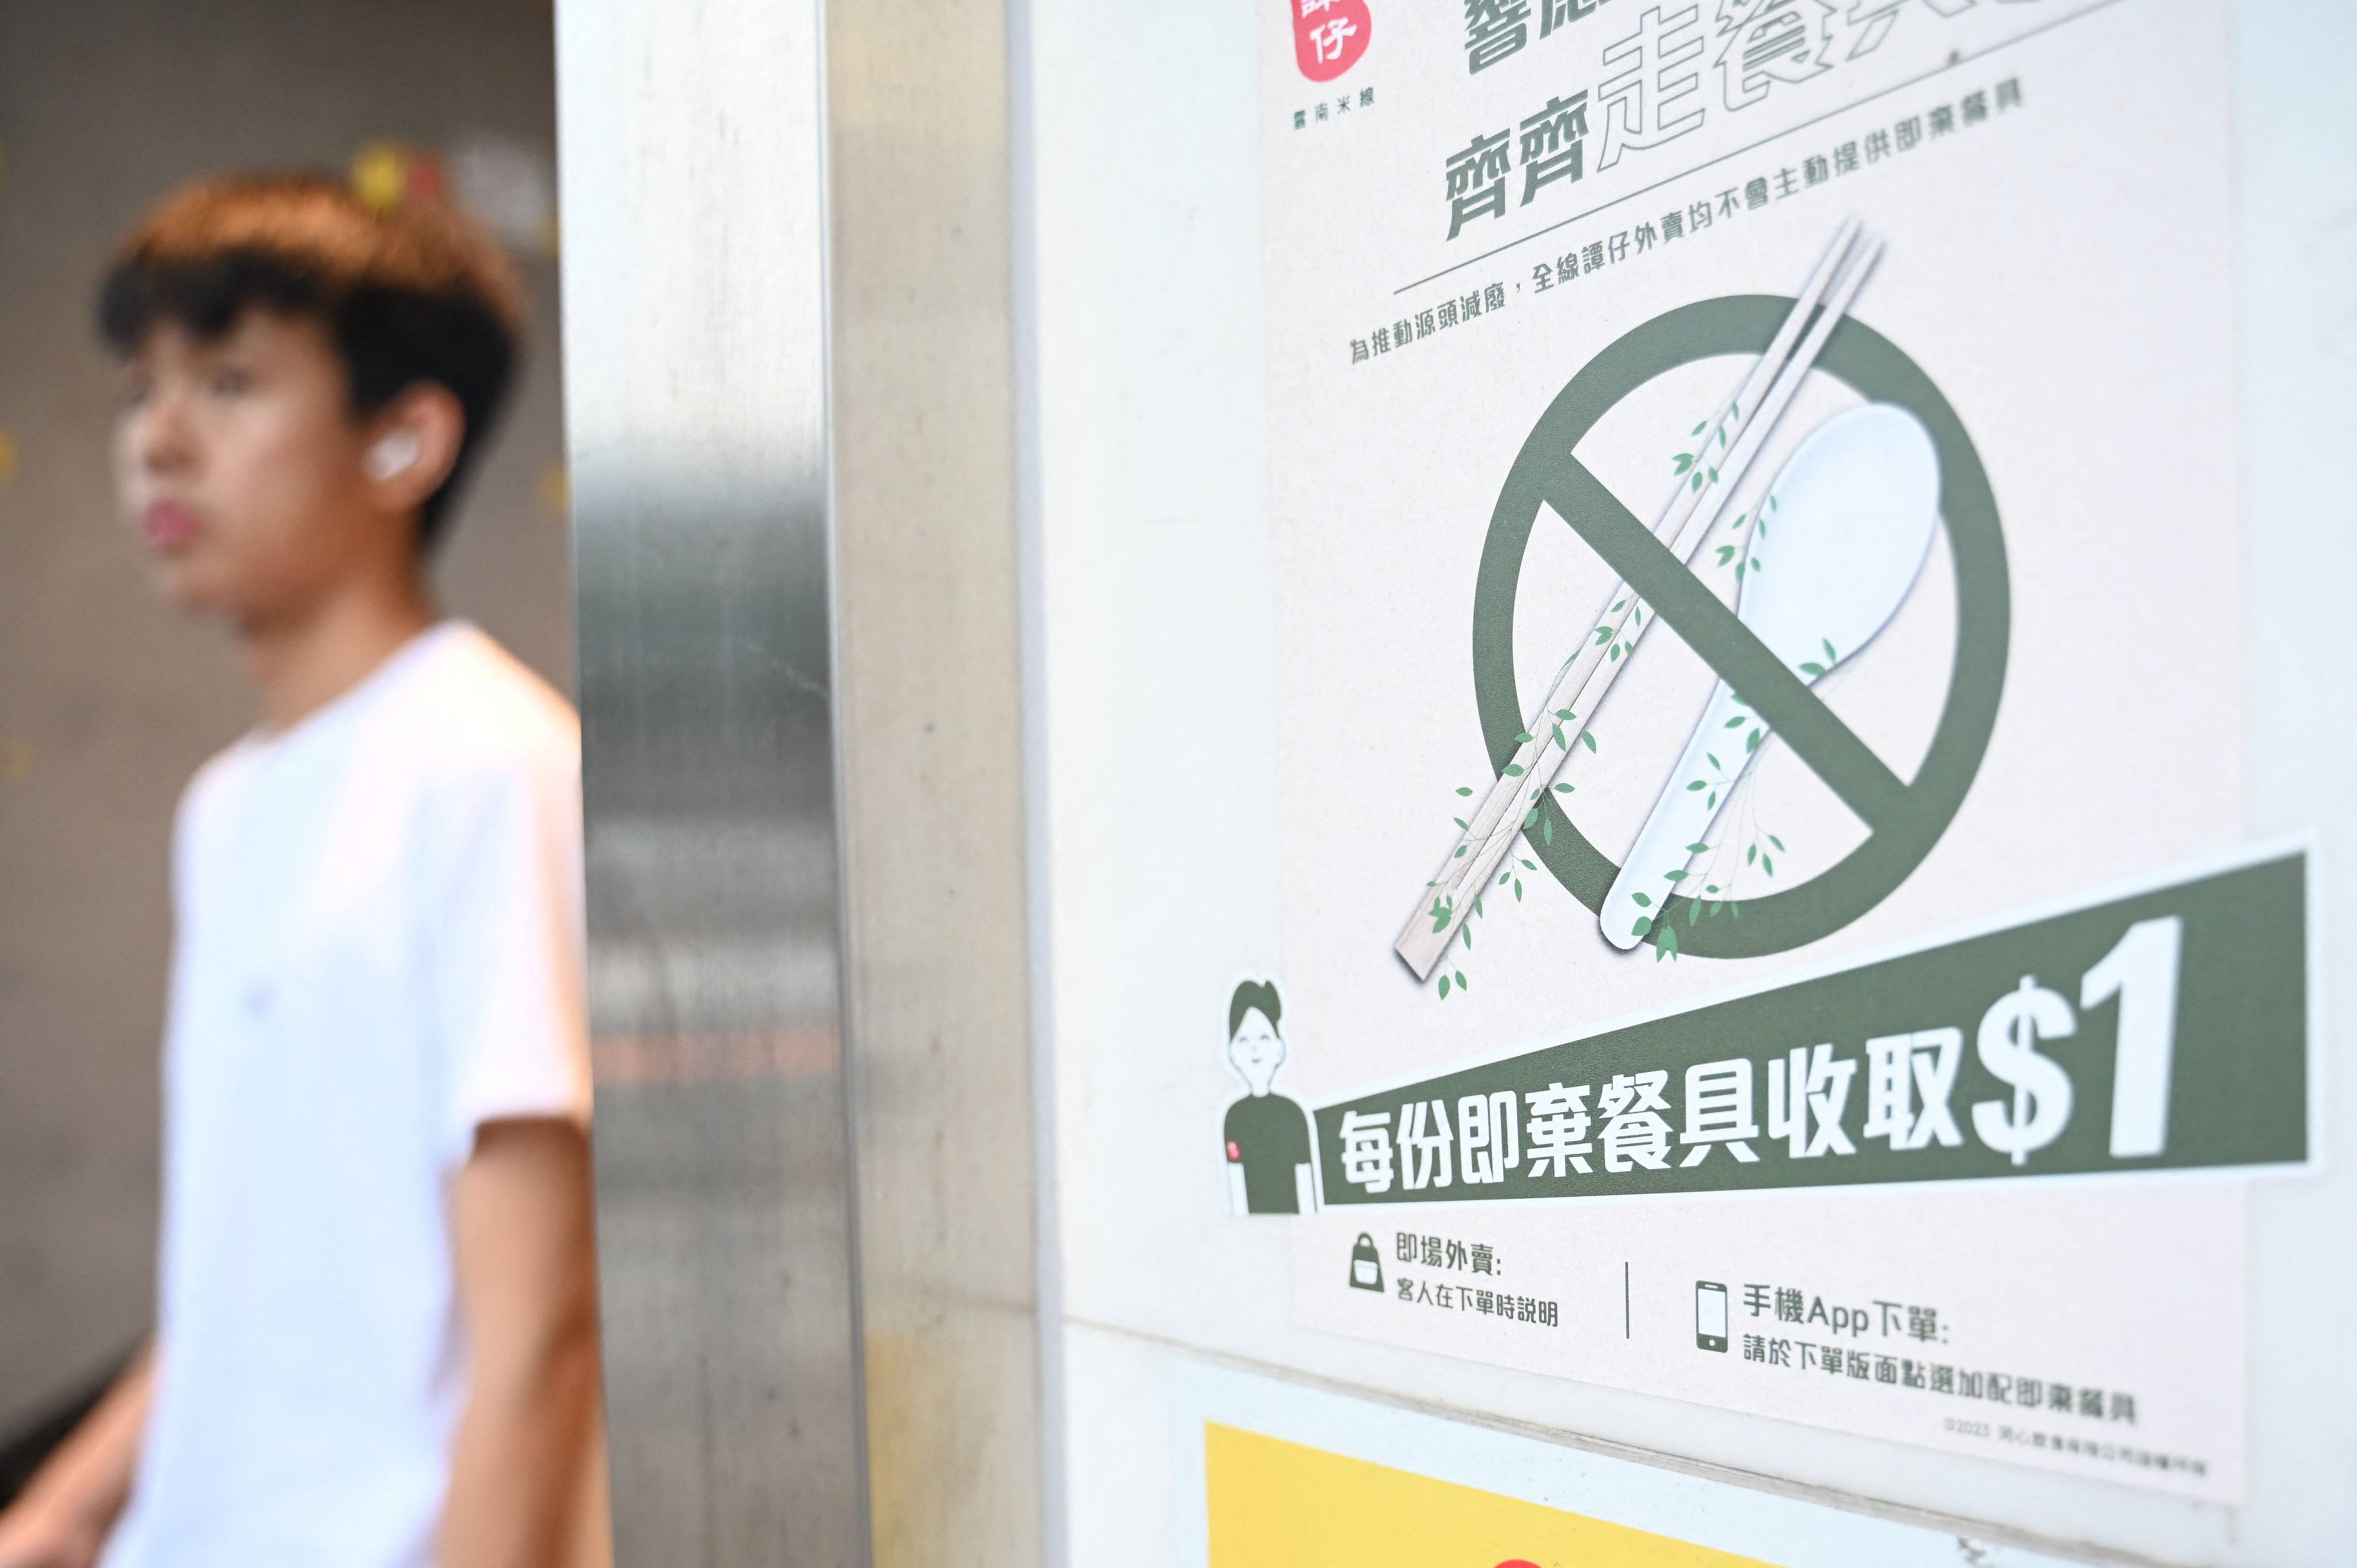 A sign at a restaurant informs patrons that it will not supply single-use plastic utensils to customers in Hong Kong, starting on April 22, as the city enforces the first phase of a ban on disposable plastic products in restaurants and hotels. Photo: AFP